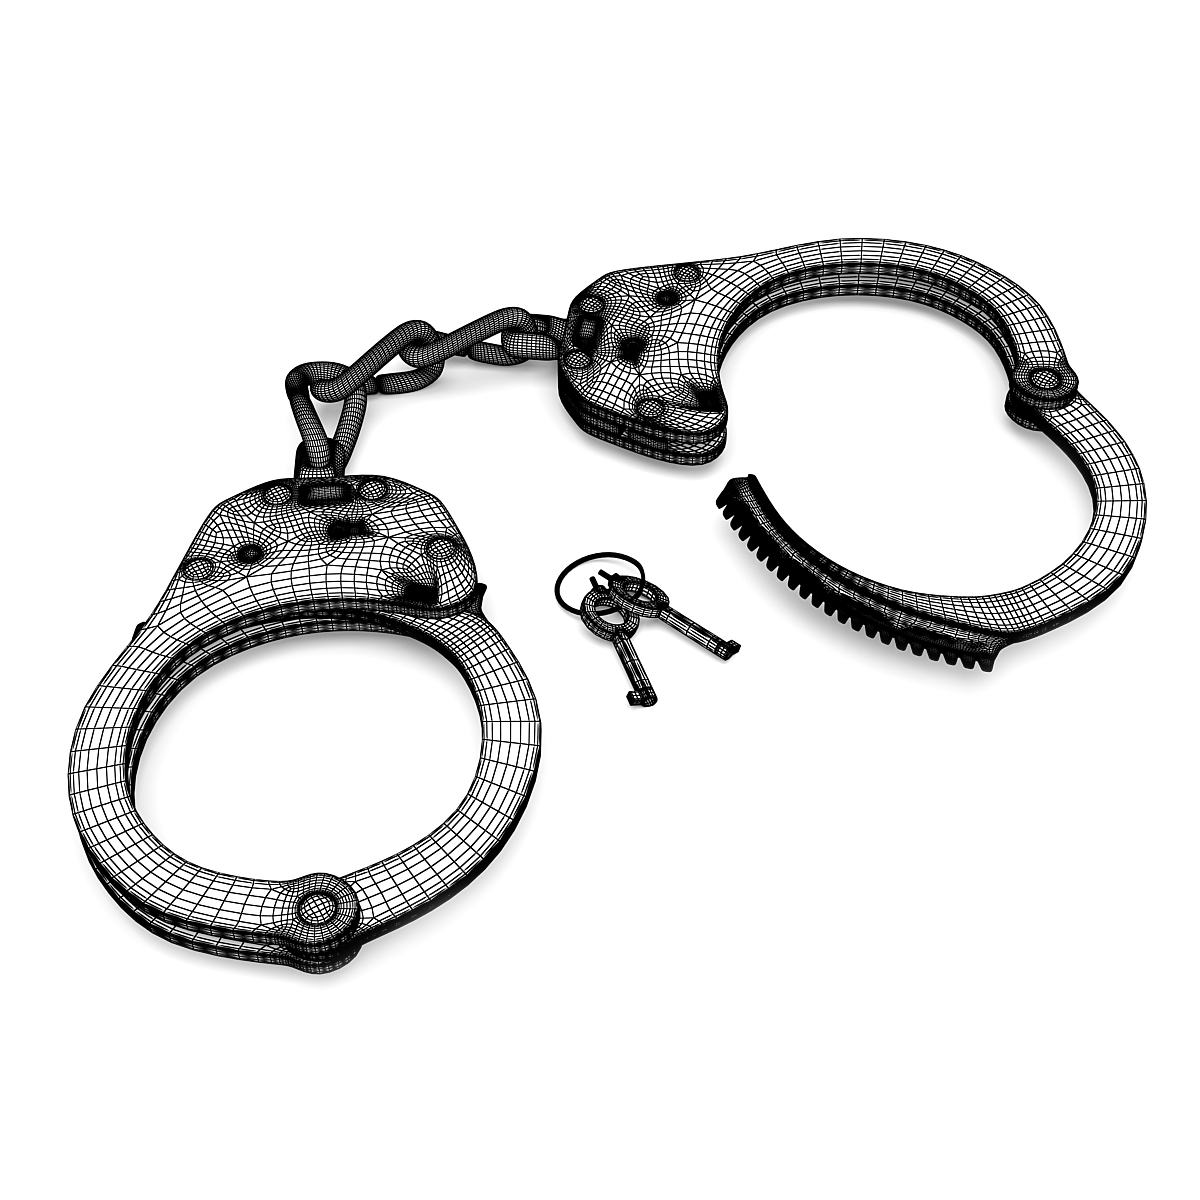 35 Picture Of Handcuffs Free Cliparts That You Can Download To You